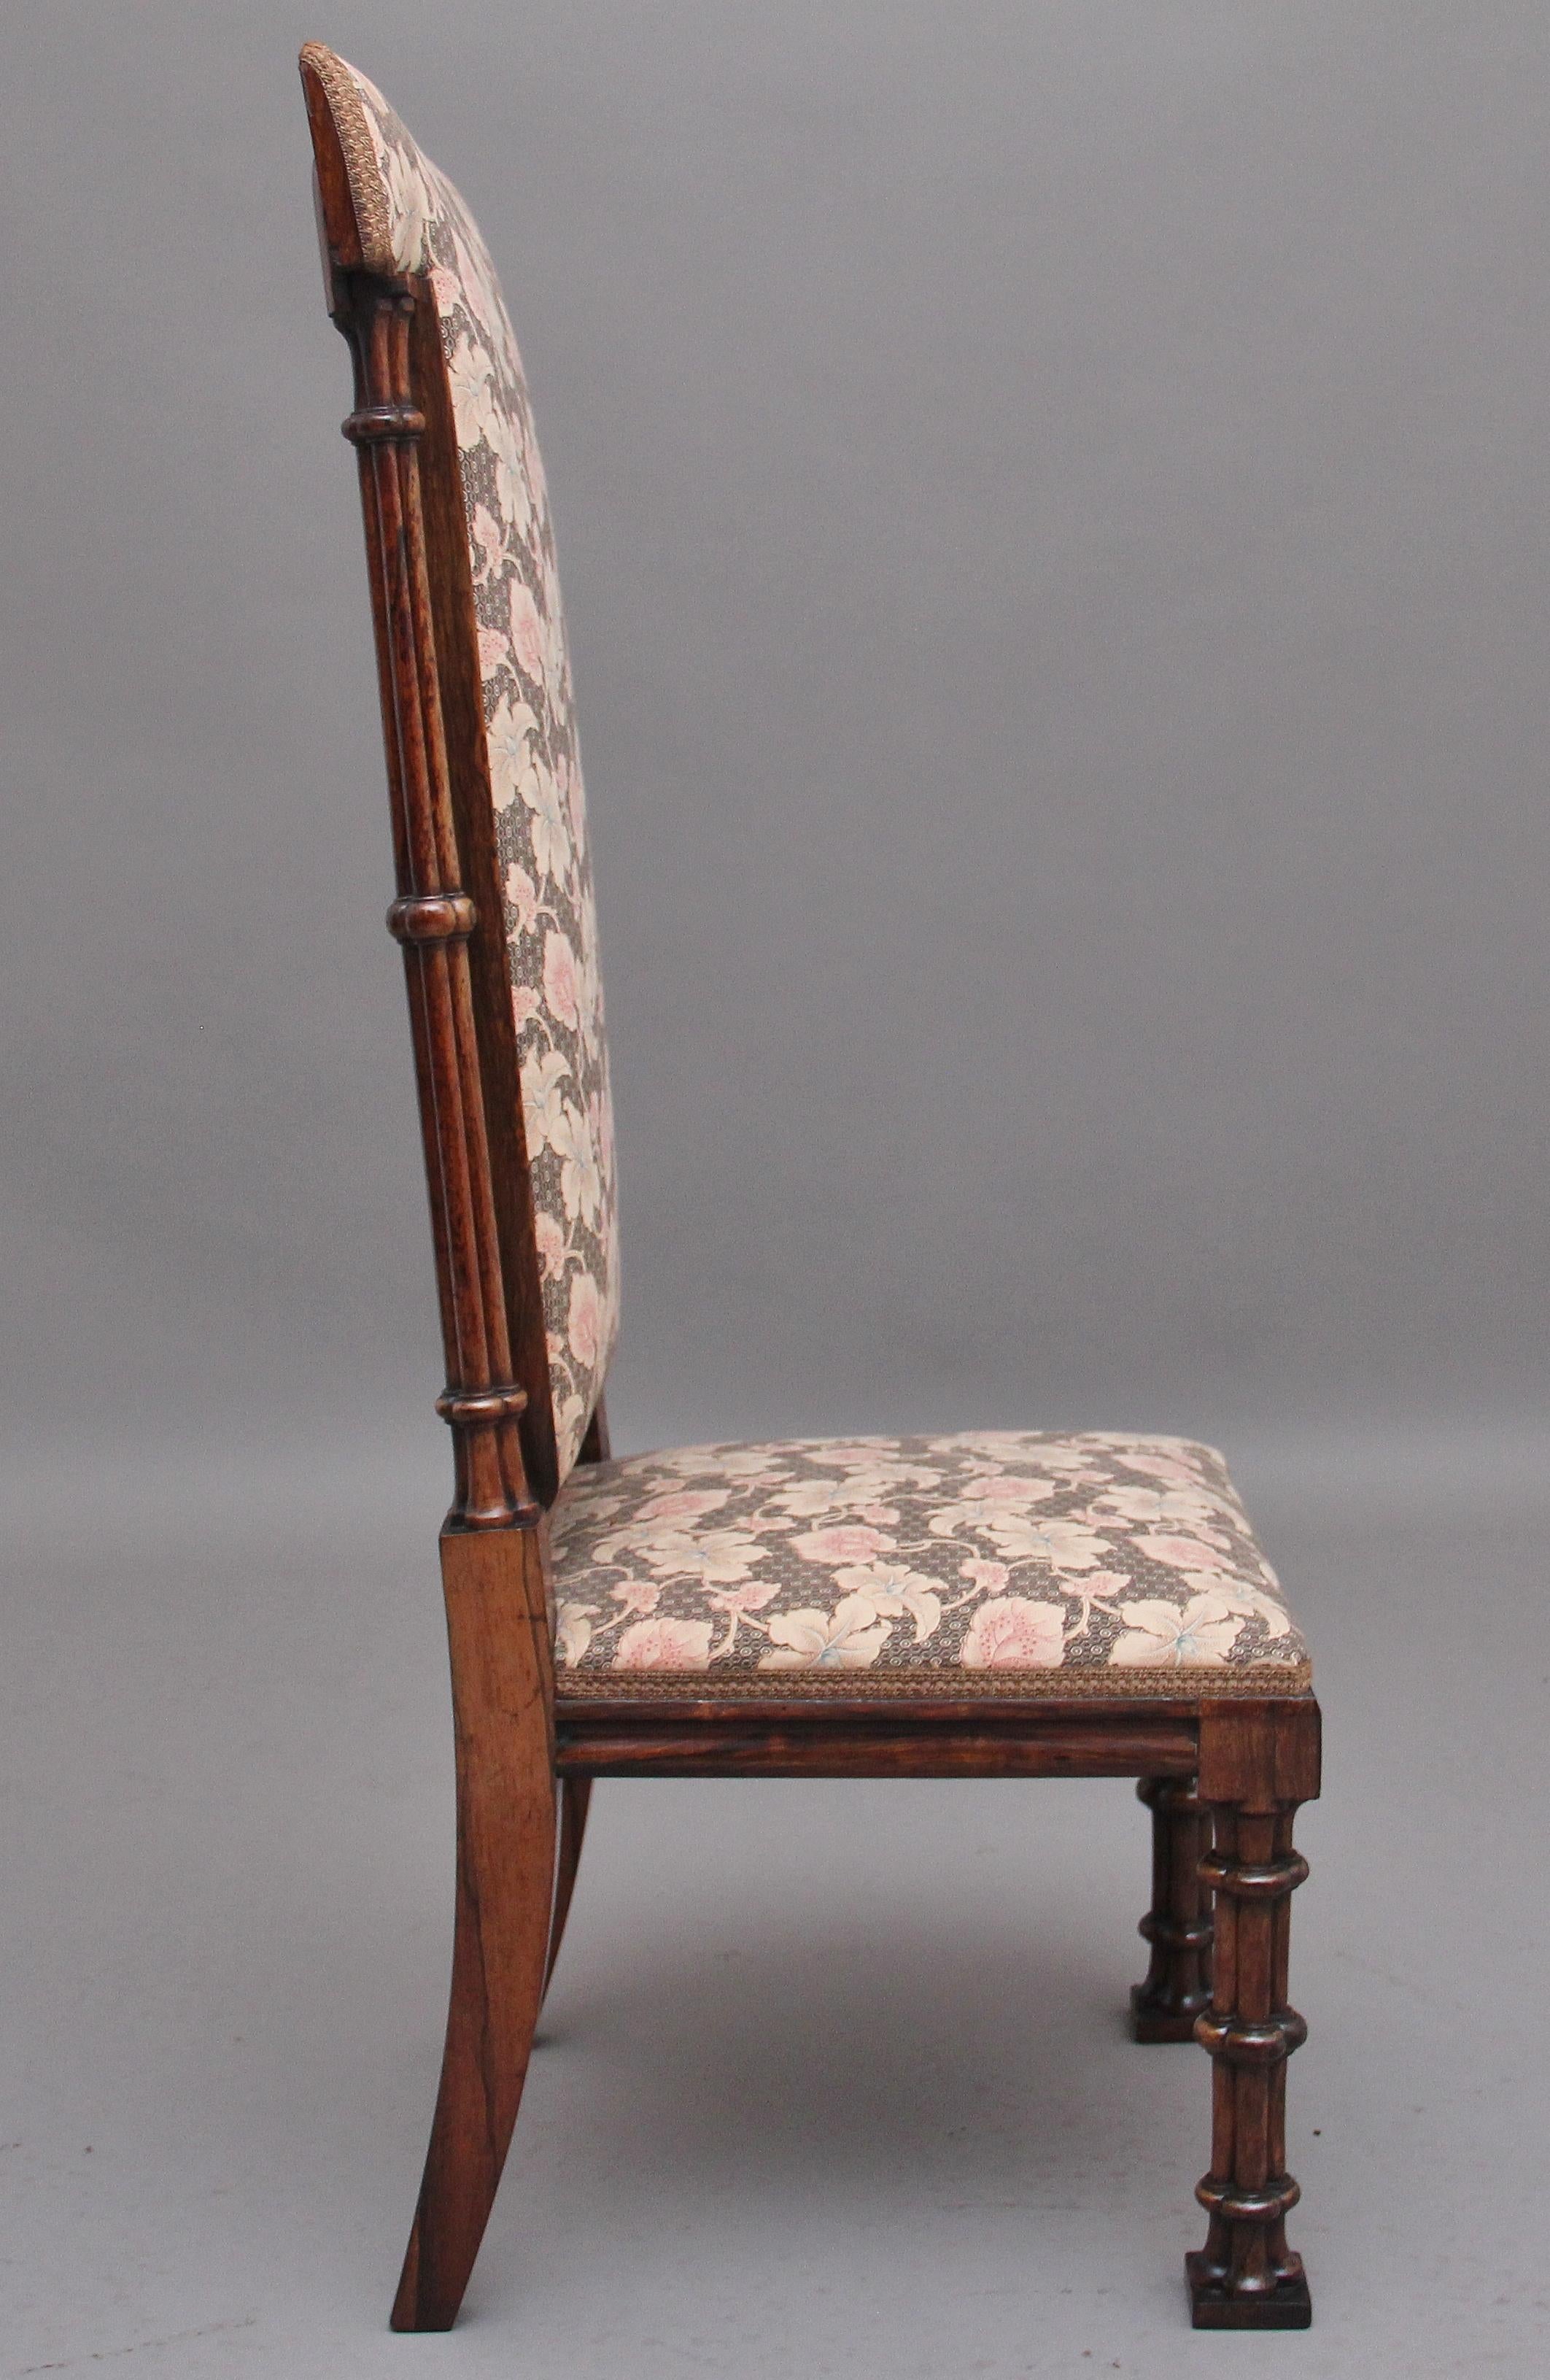 A lovely quality Regency rosewood side chair in the Gothic style, the padded high back upholstered in a decorative floral pattern along with the cushioned seat, either side of the high back there are elegant turned supports leading down to the